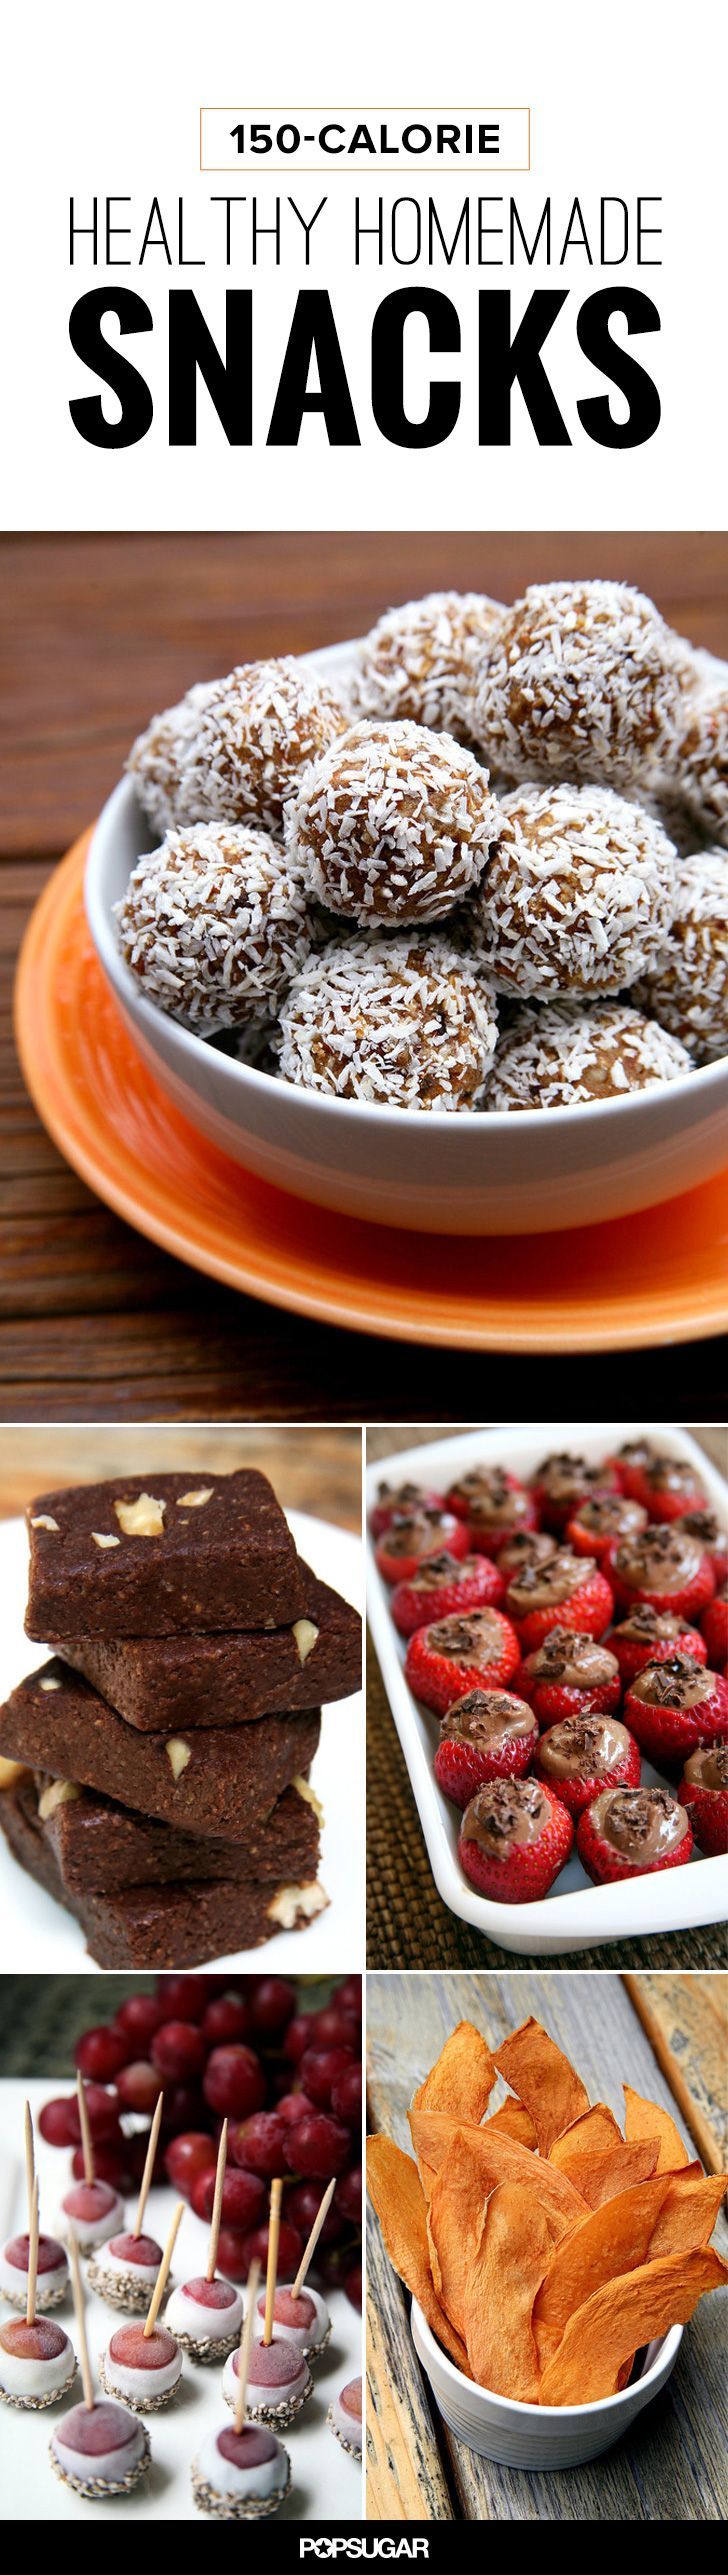 45 Snacks to Satisfy Hunger, All Under 150 Calories! Dark Chocolate Almond Coconut bites look delicious!